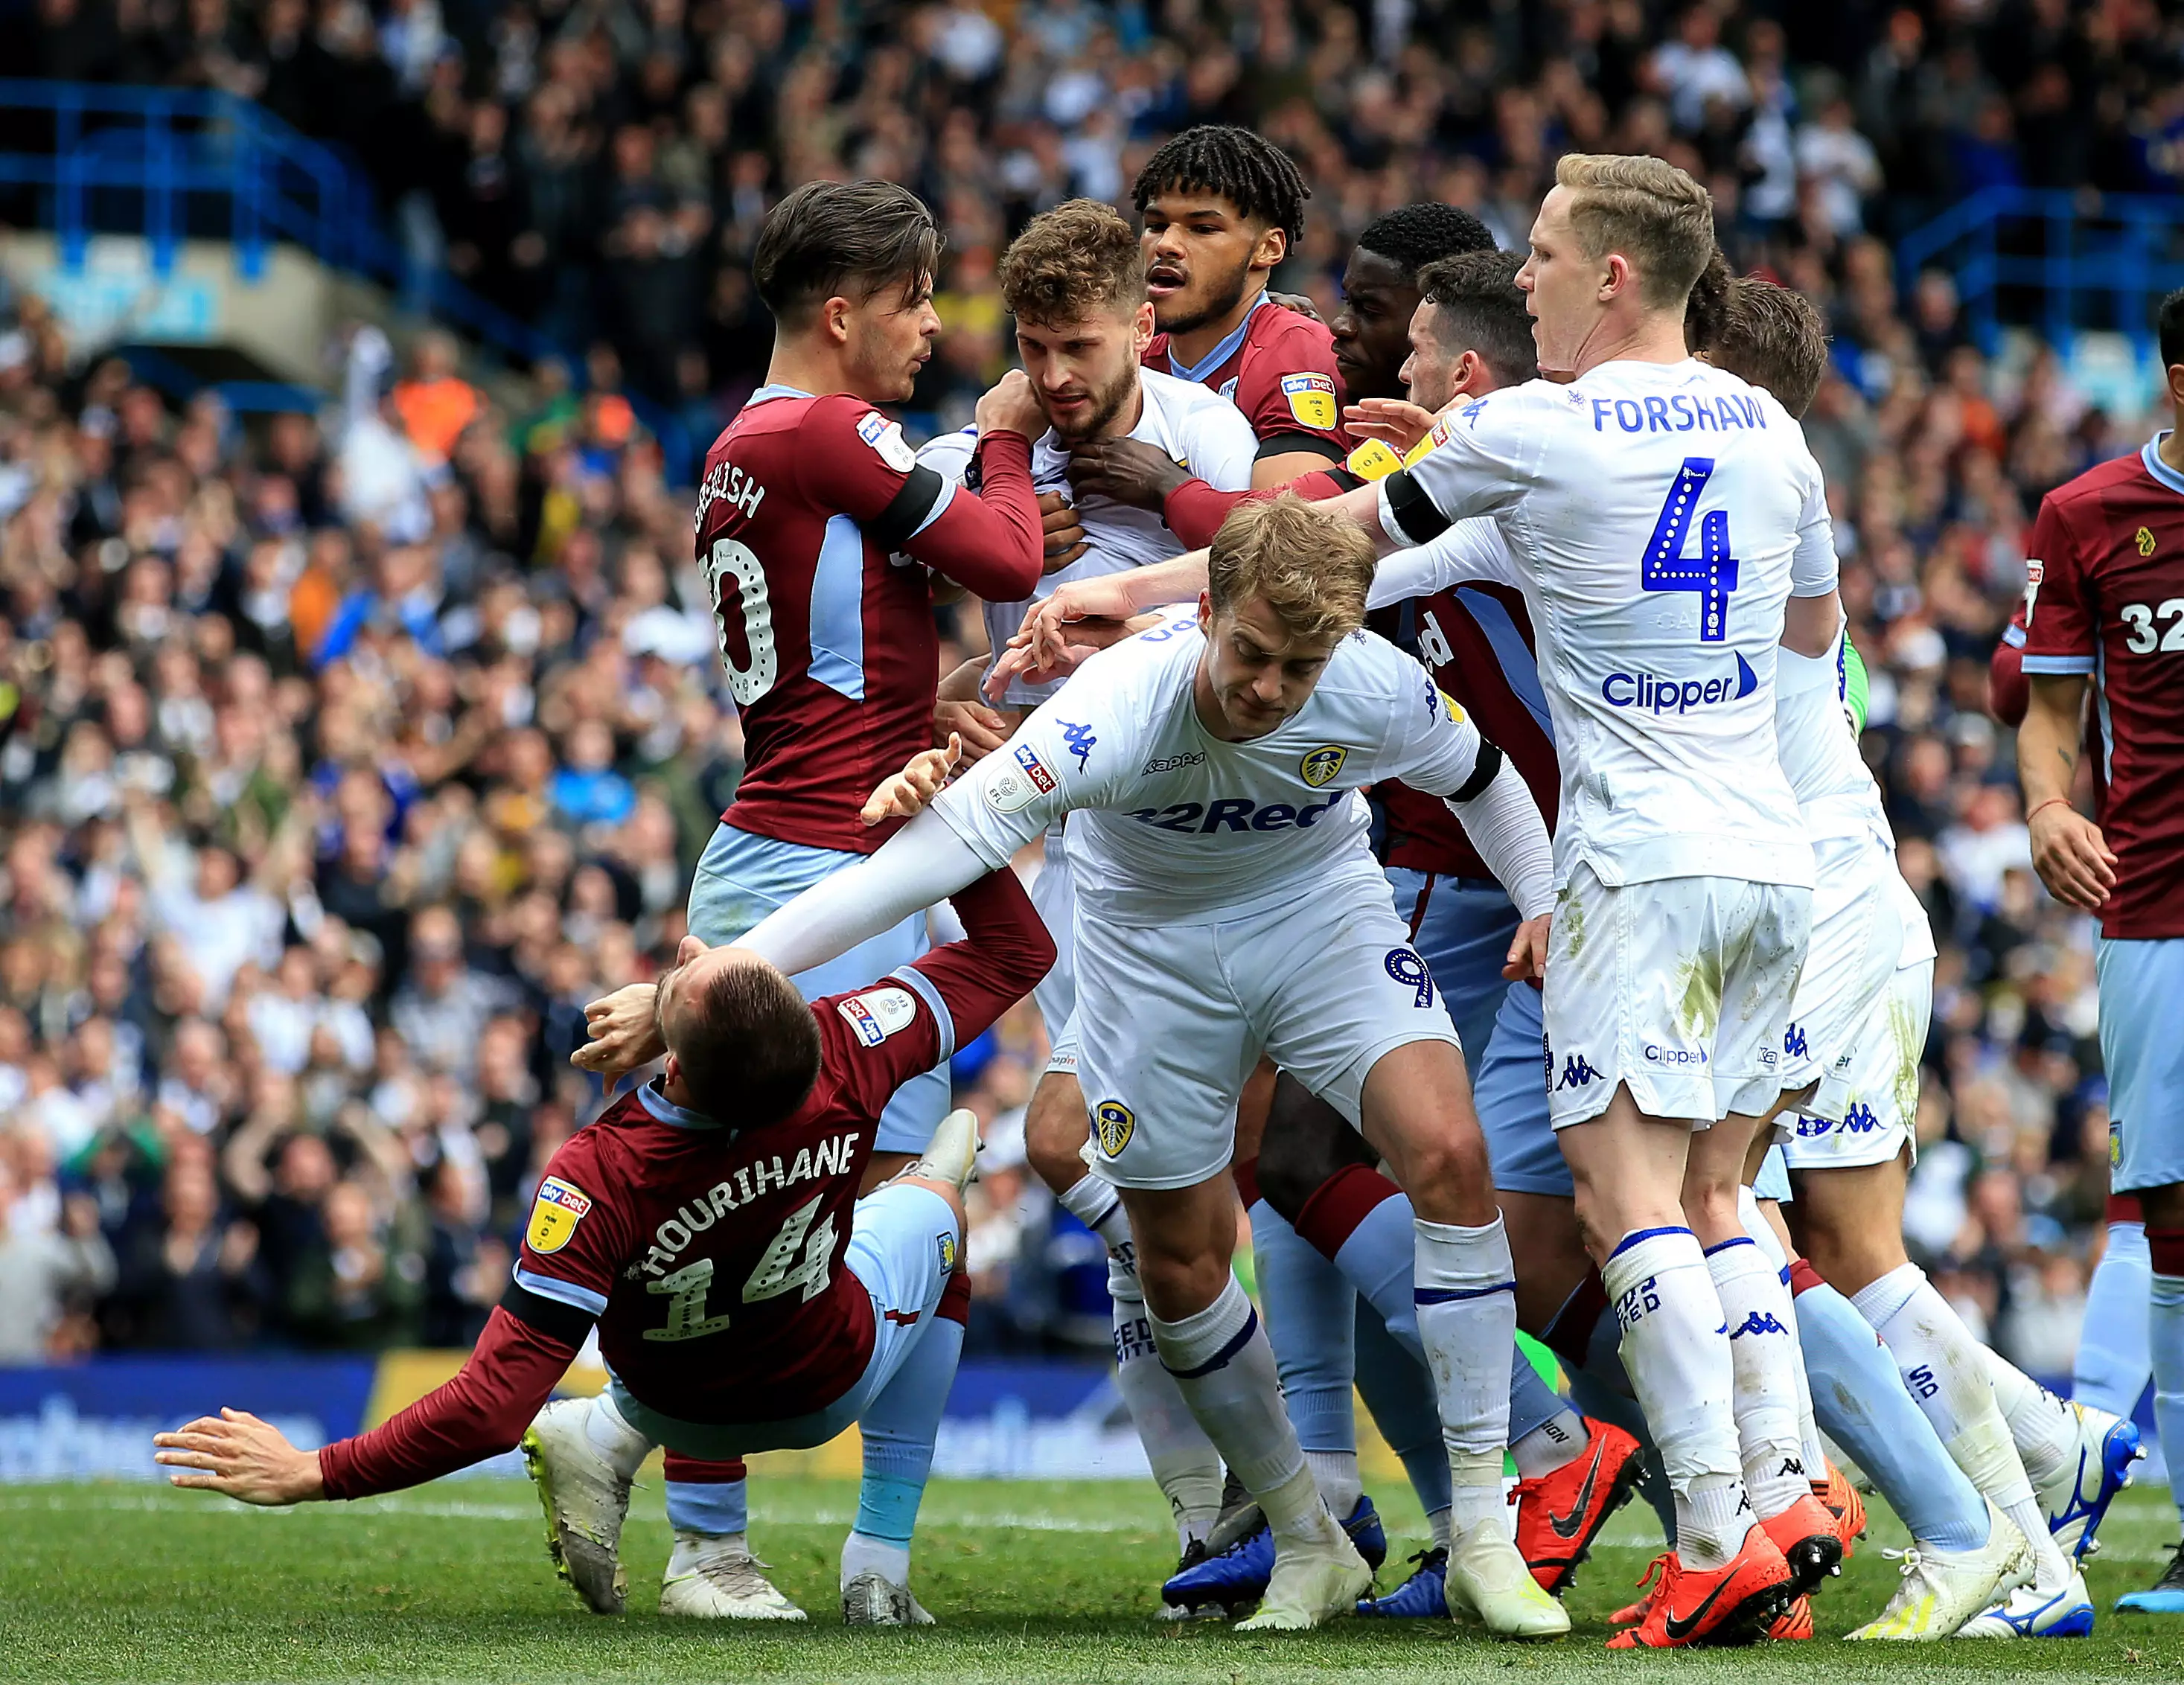 There was a huge melee in the match against Aston Villa at the end of the season. Image: PA Images